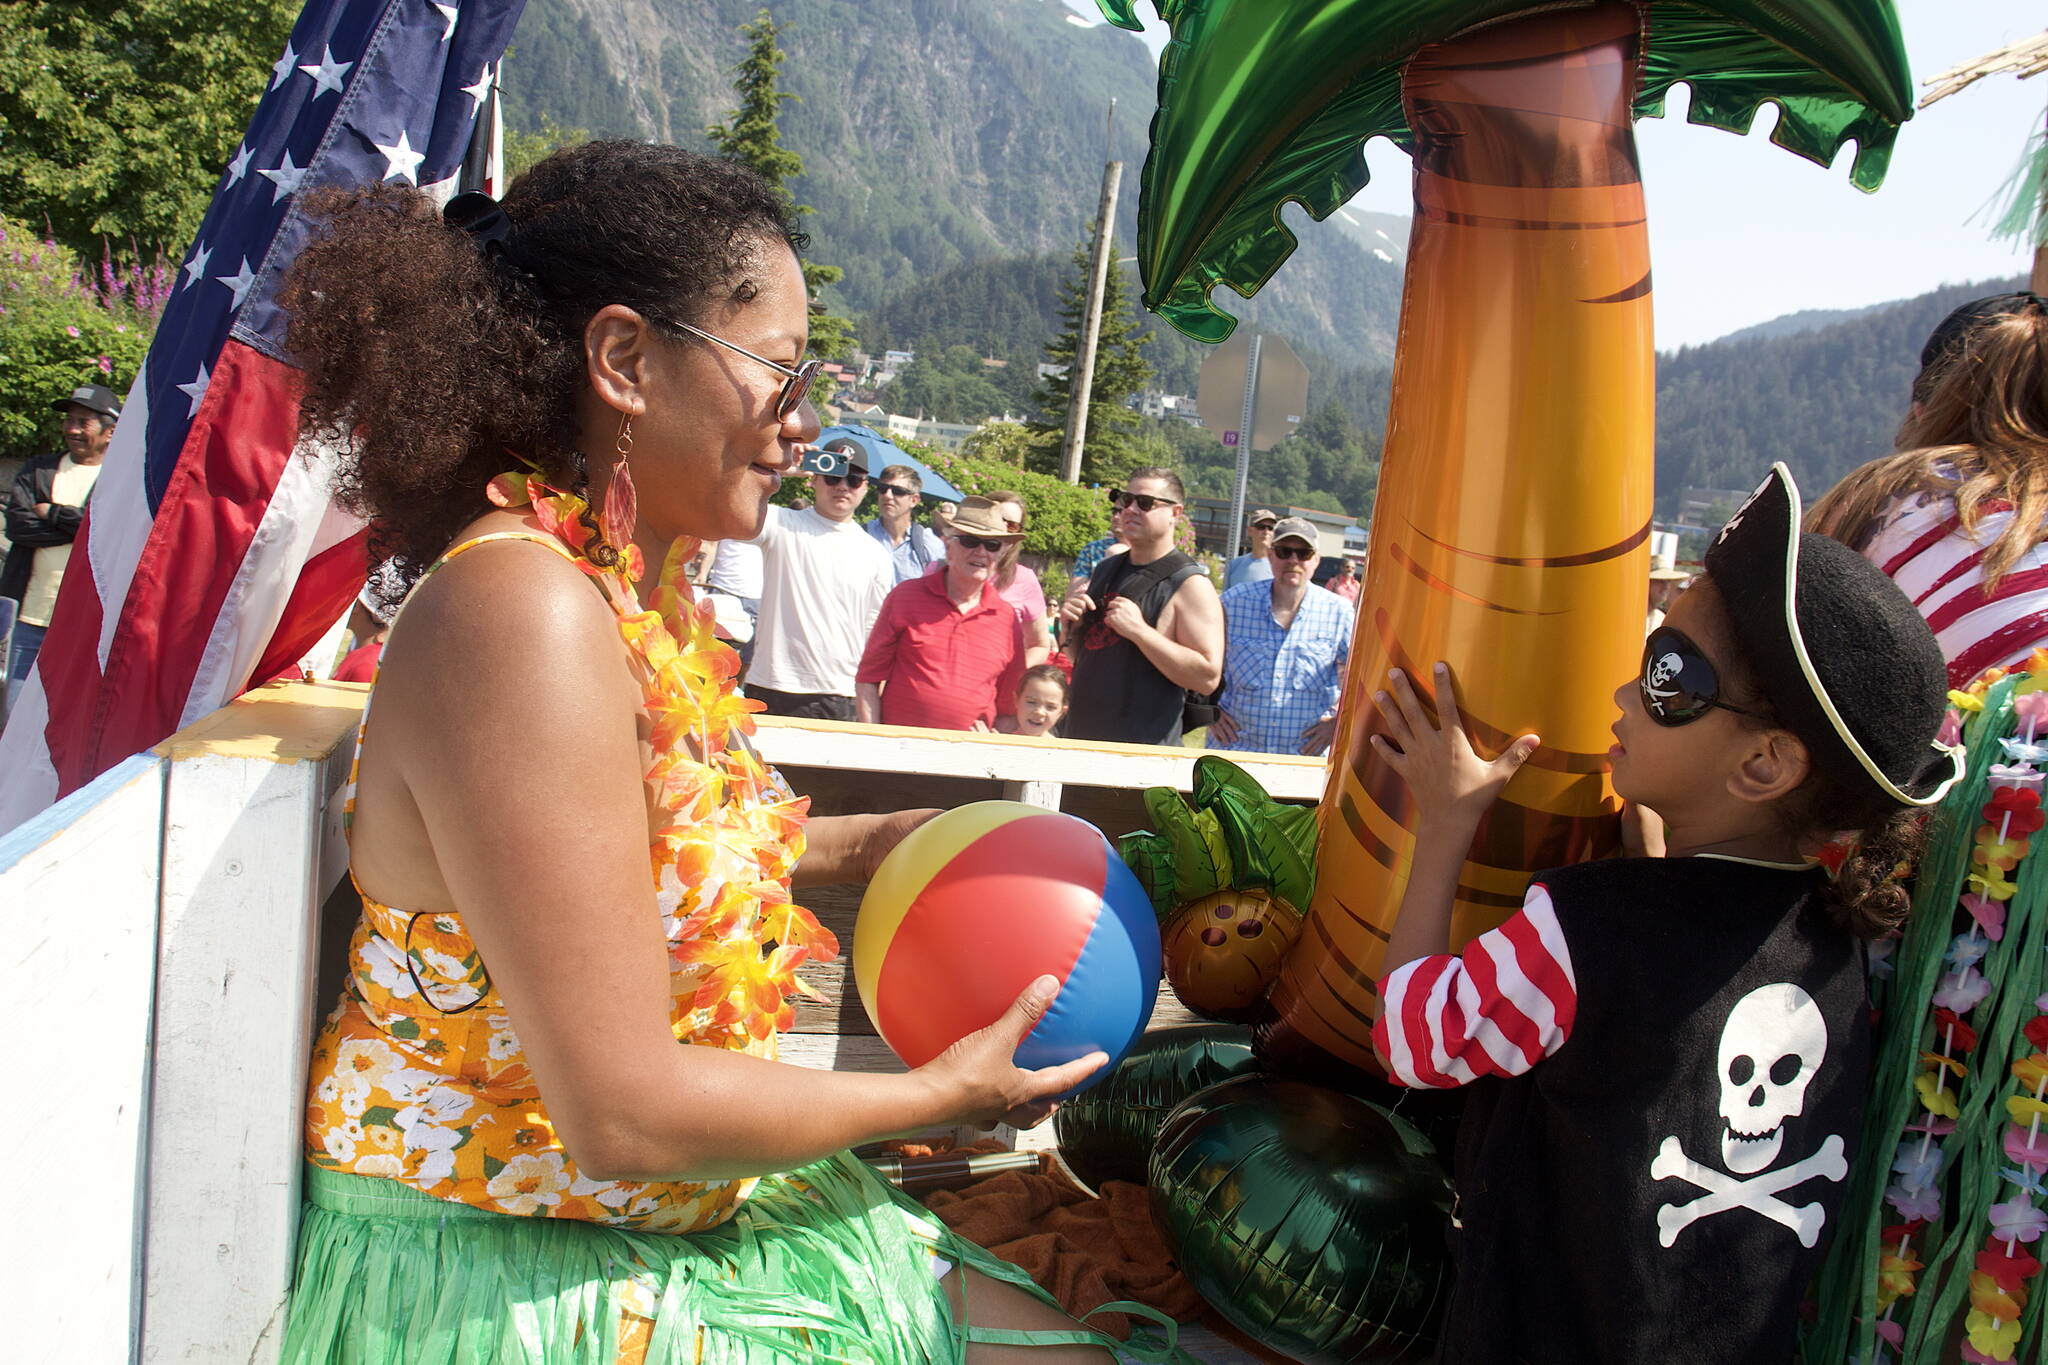 Photos by Mark Sabbatini / Juneau Empire 
Rachel Hurst hands her son Benjamin, 4, a beach ball to throw to the crowd from the Hawaiian-themed Juneau Urgent Care float during the July 4 parade in downtown Juneau. Below, Wayne Fu Smallwood, who is Tlingit and was among about 30 Alaska Native veterans on a float that won the Most Alaskan theme in the parade, says Independence Day for him this year remains a time to celebrate the traditional culture of his people going back thousands of years.